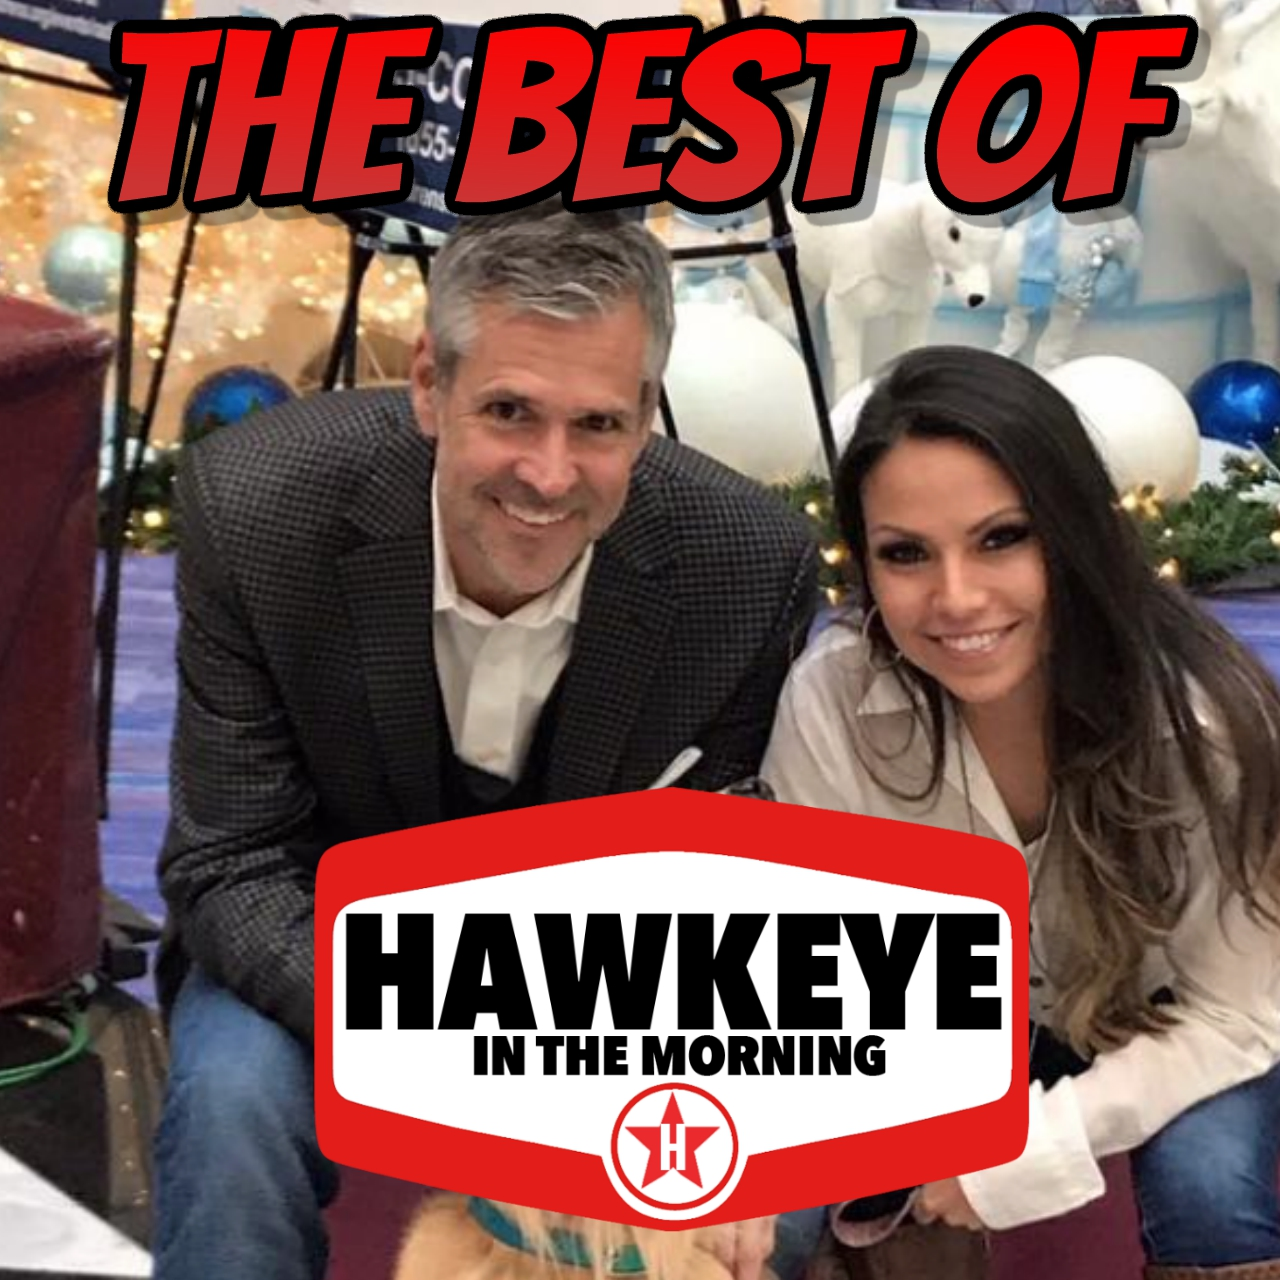 Get Your Class to Sing Our Jingle Hawkeye And Michelle.  Here It Is